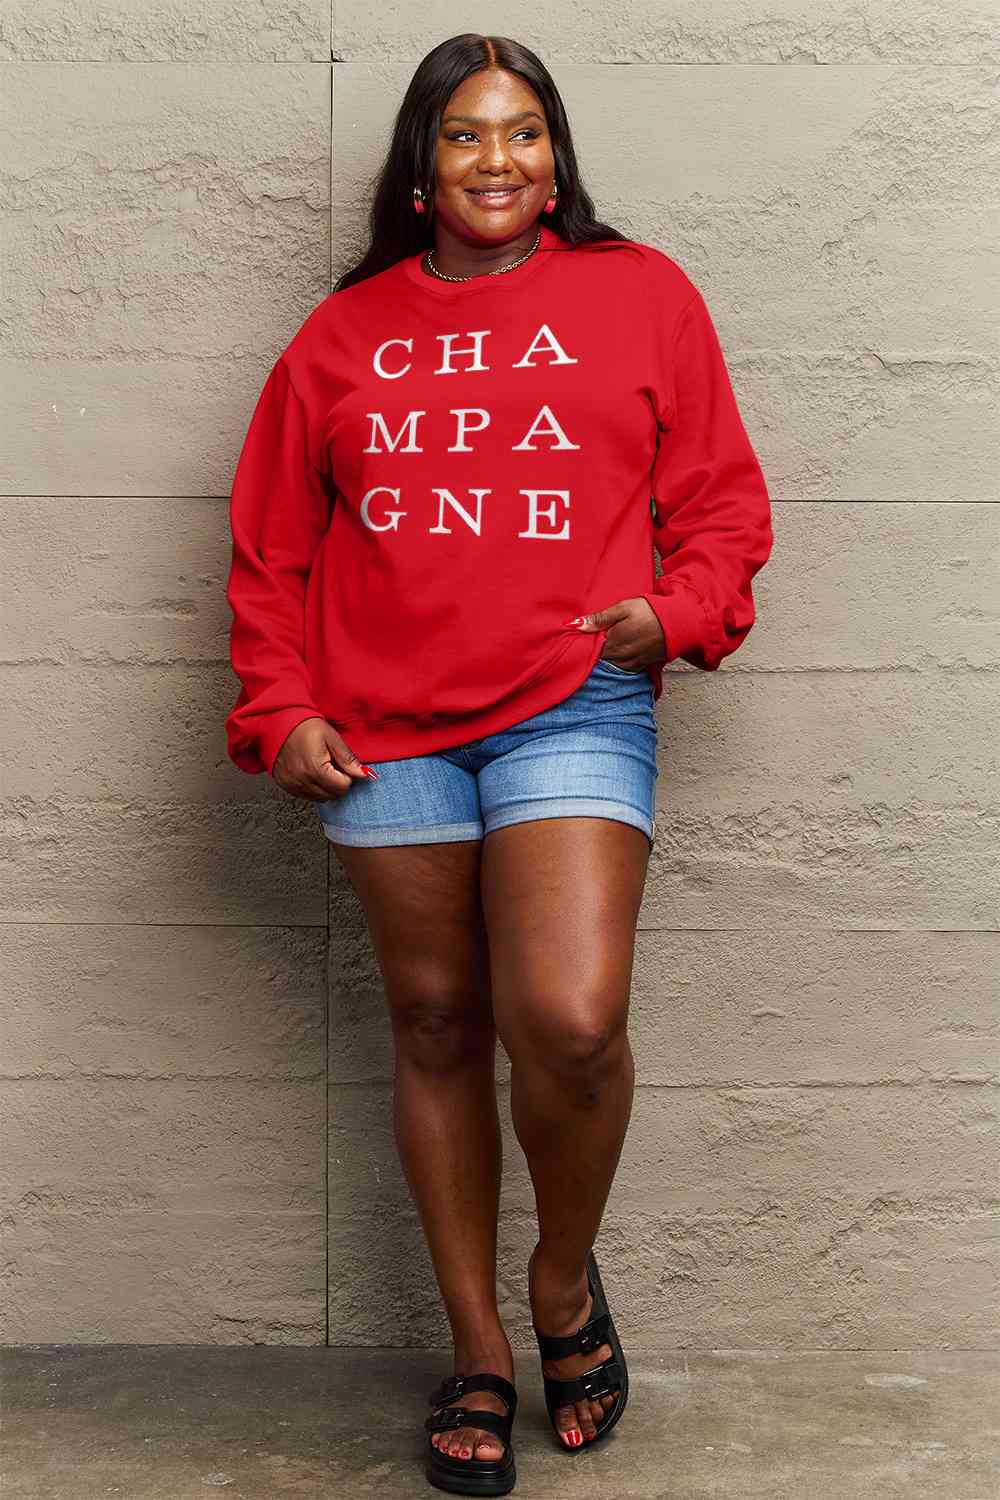 Simply Love Full Size CHAMPAGNE Graphic Long Sleeve Sweatshirt BLUE ZONE PLANET